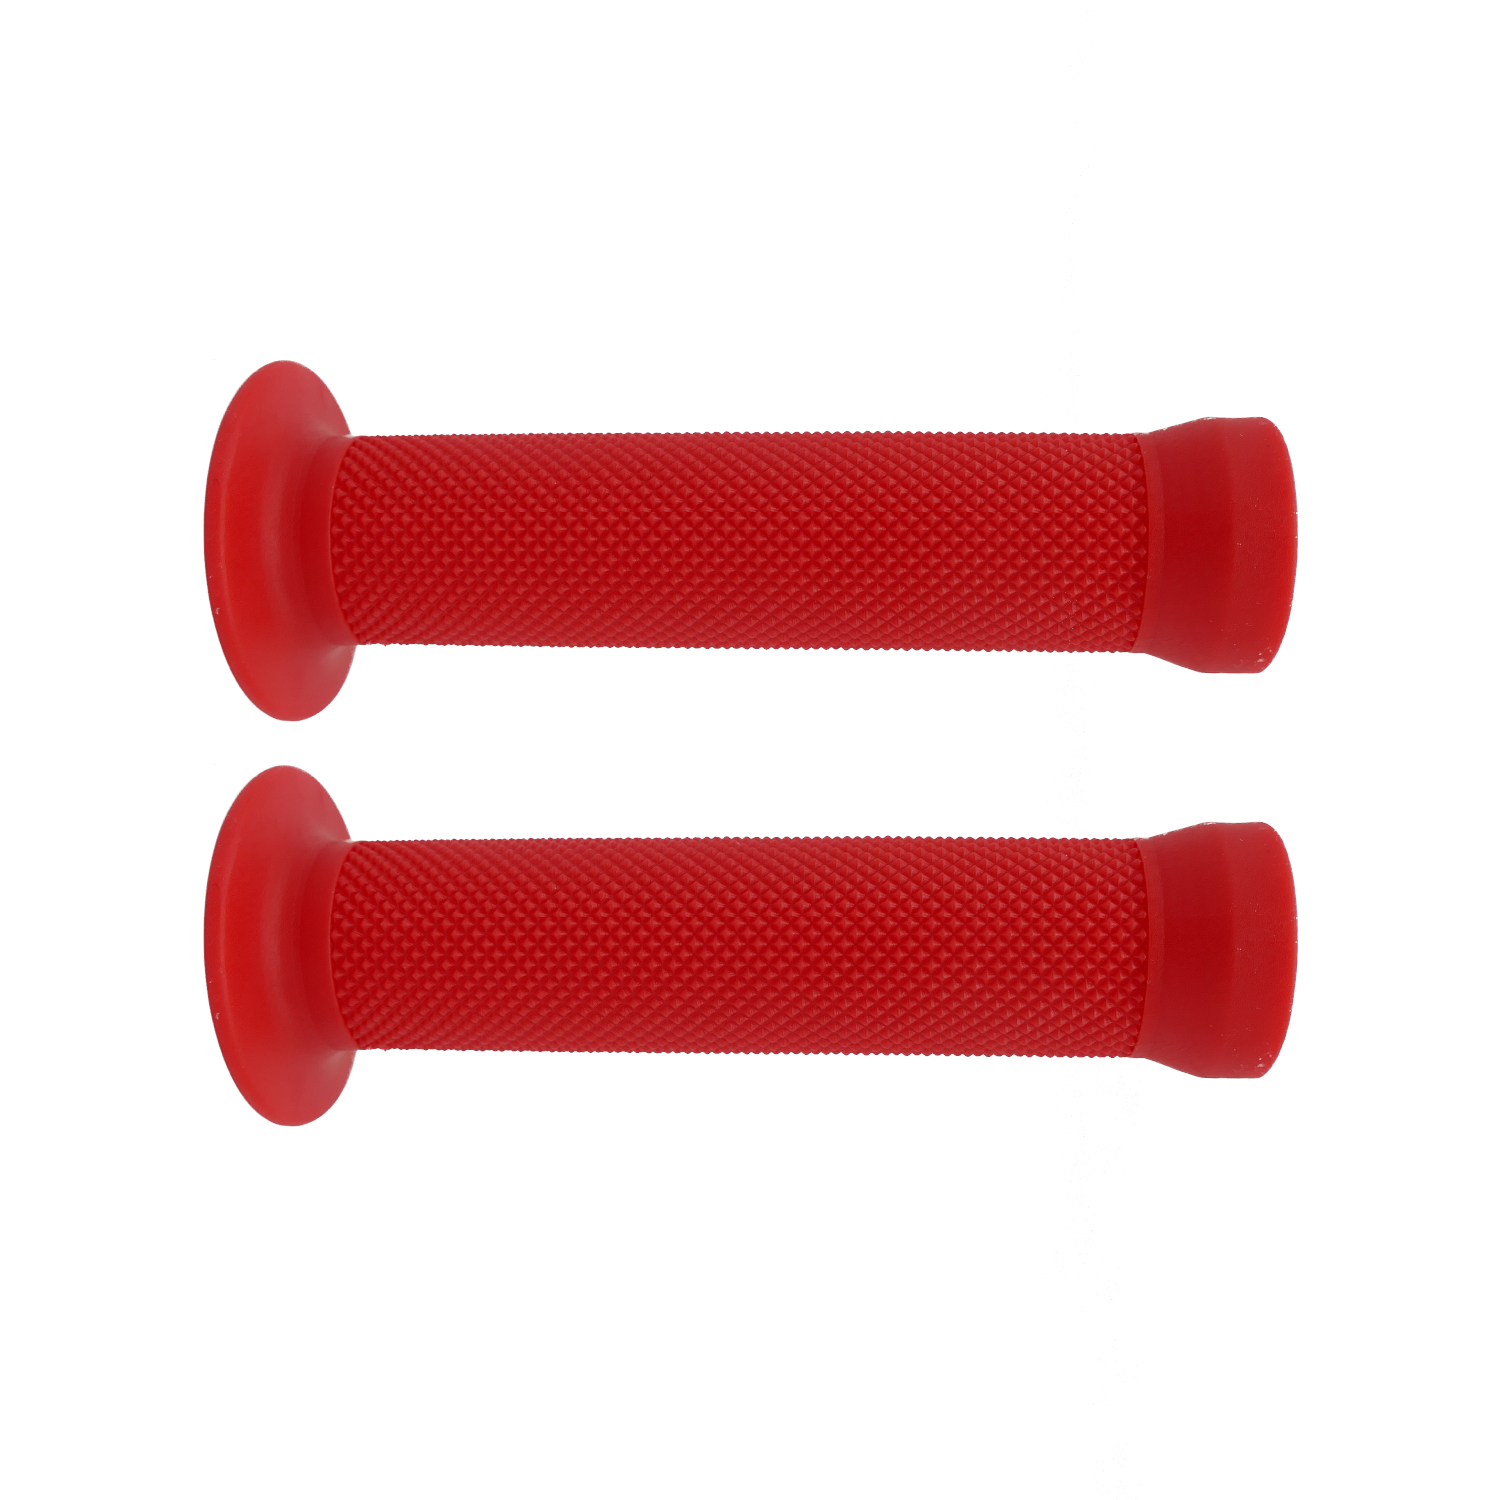 P4B BMX Griffe 130/130 mm in Rot, 1 Paar